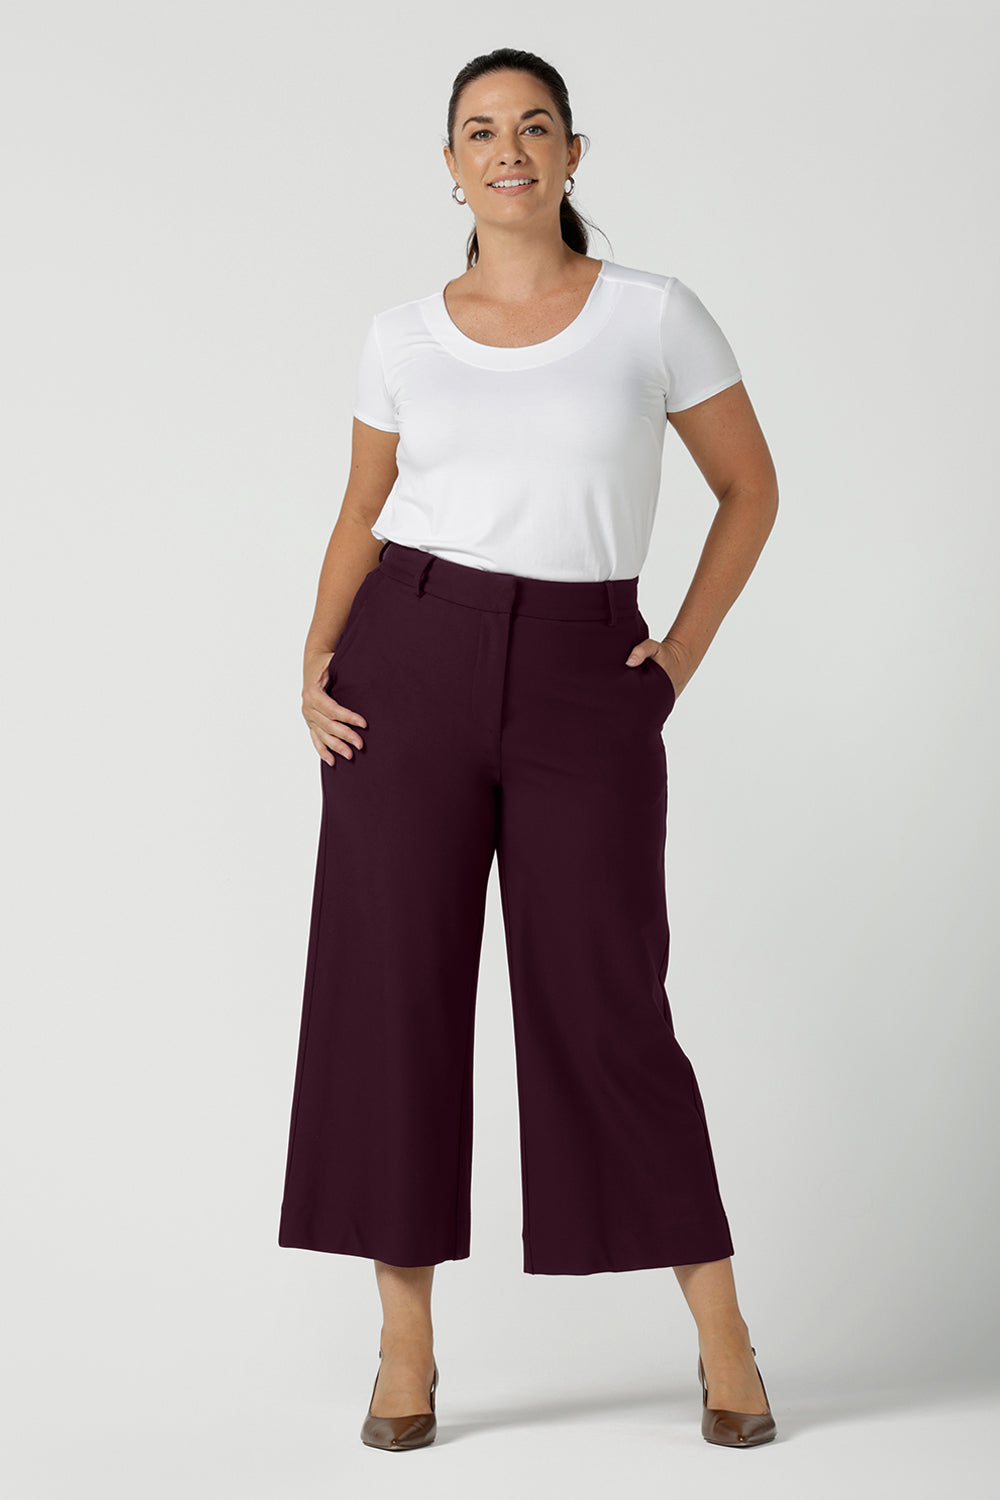 Size 12 Yael Pant in Mulberry. High waist tailored pant with pockets and fly front. Comfortable corporate work pants. Made in Australia for women size 8 to 24.